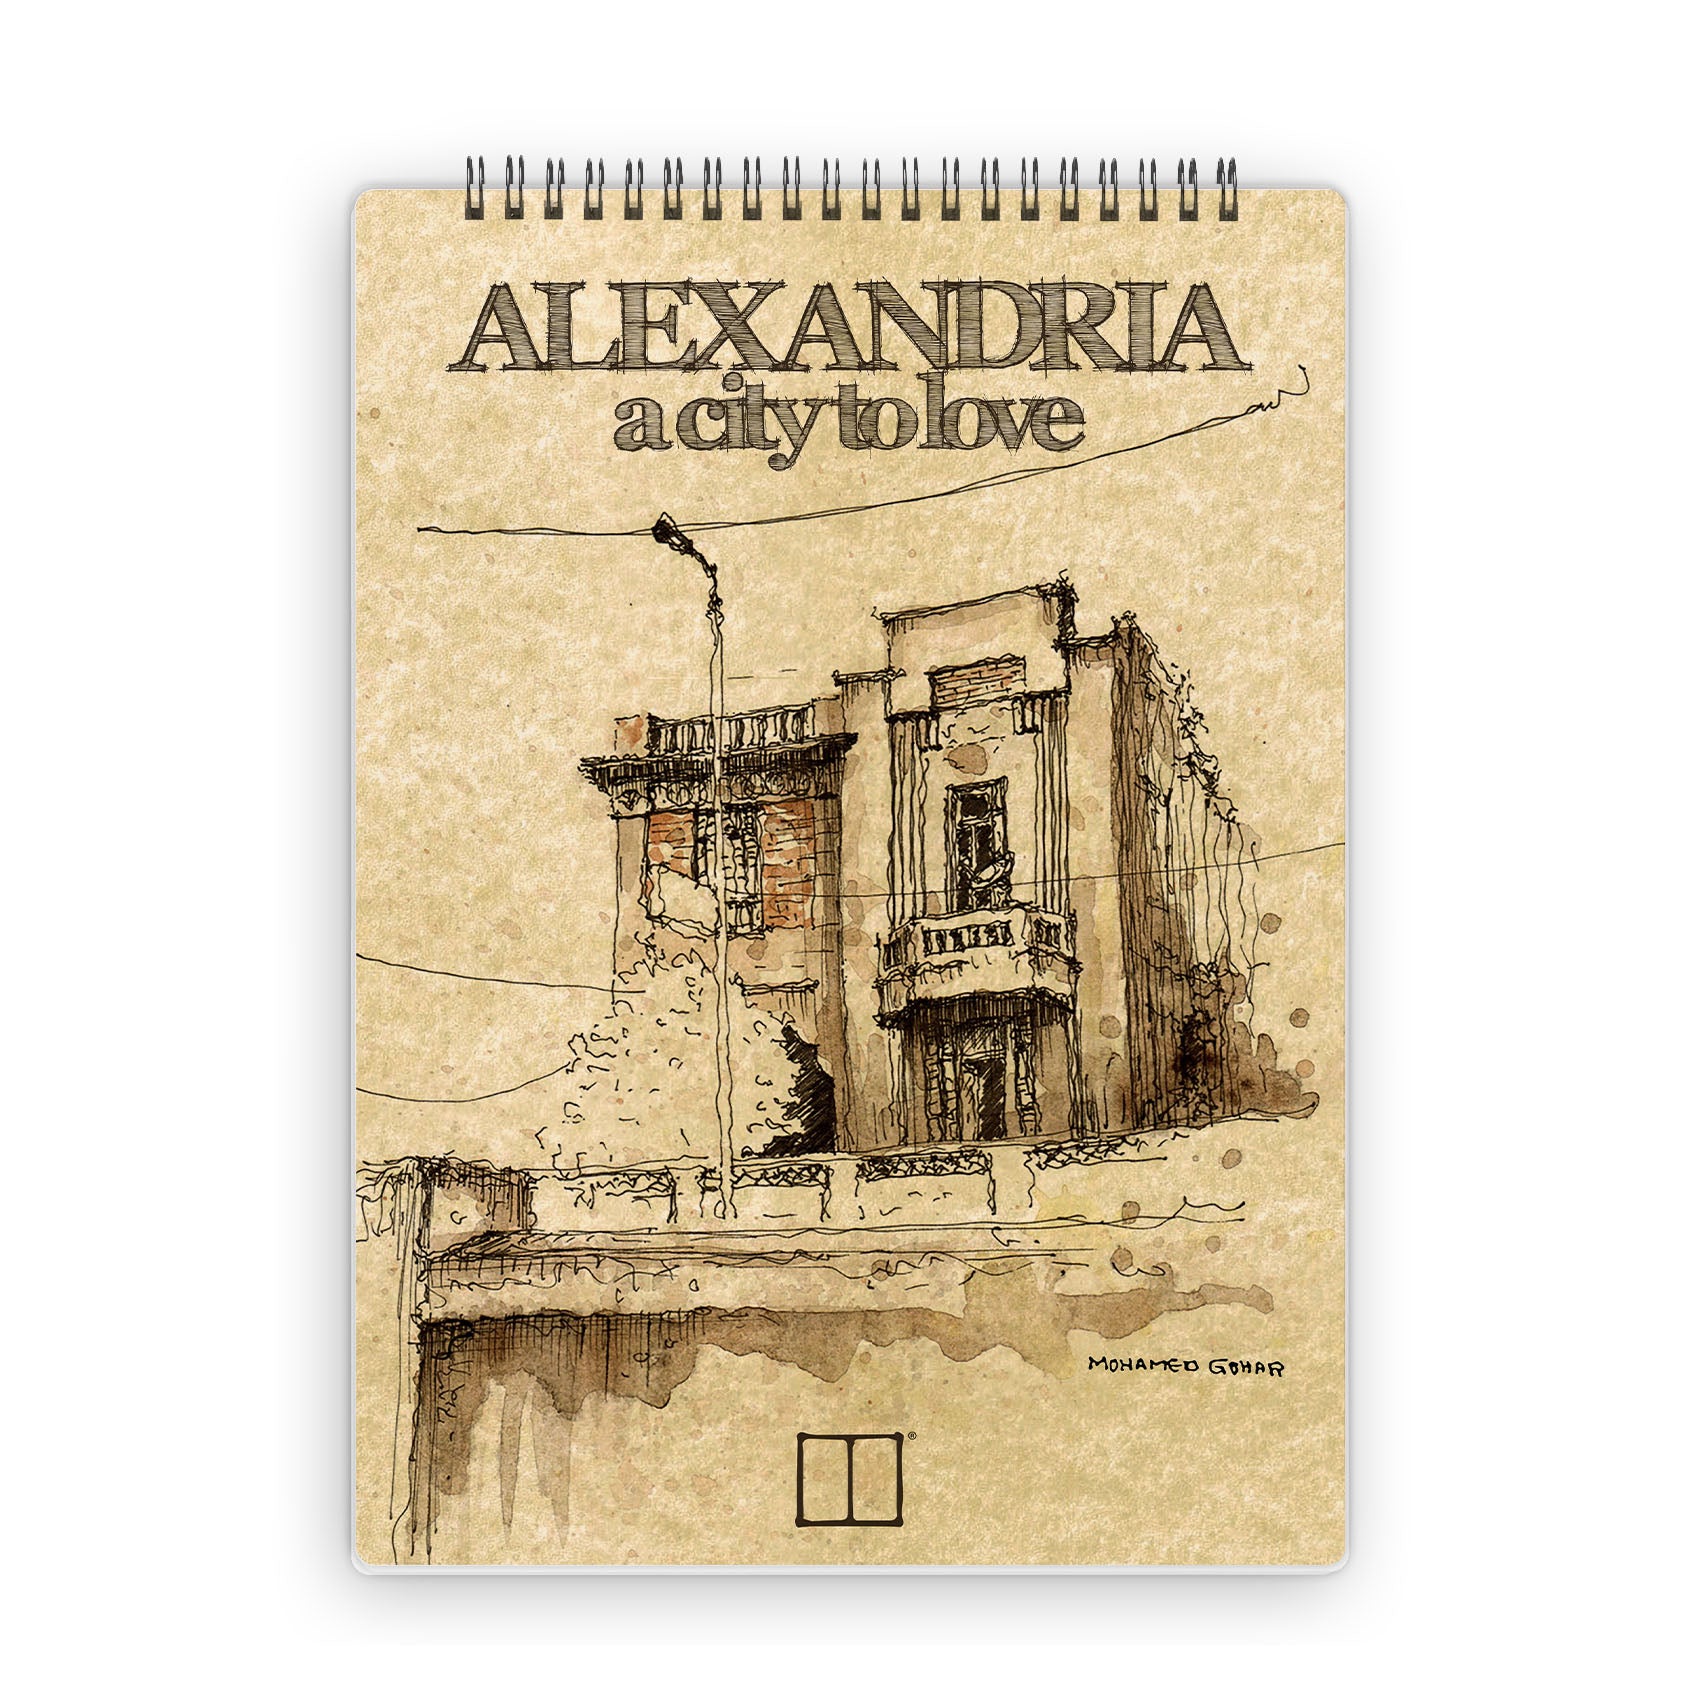 Sketchbook | 28 X 20 cm - (Alexandria a city to love) - 03 - from SketchBook Stationery